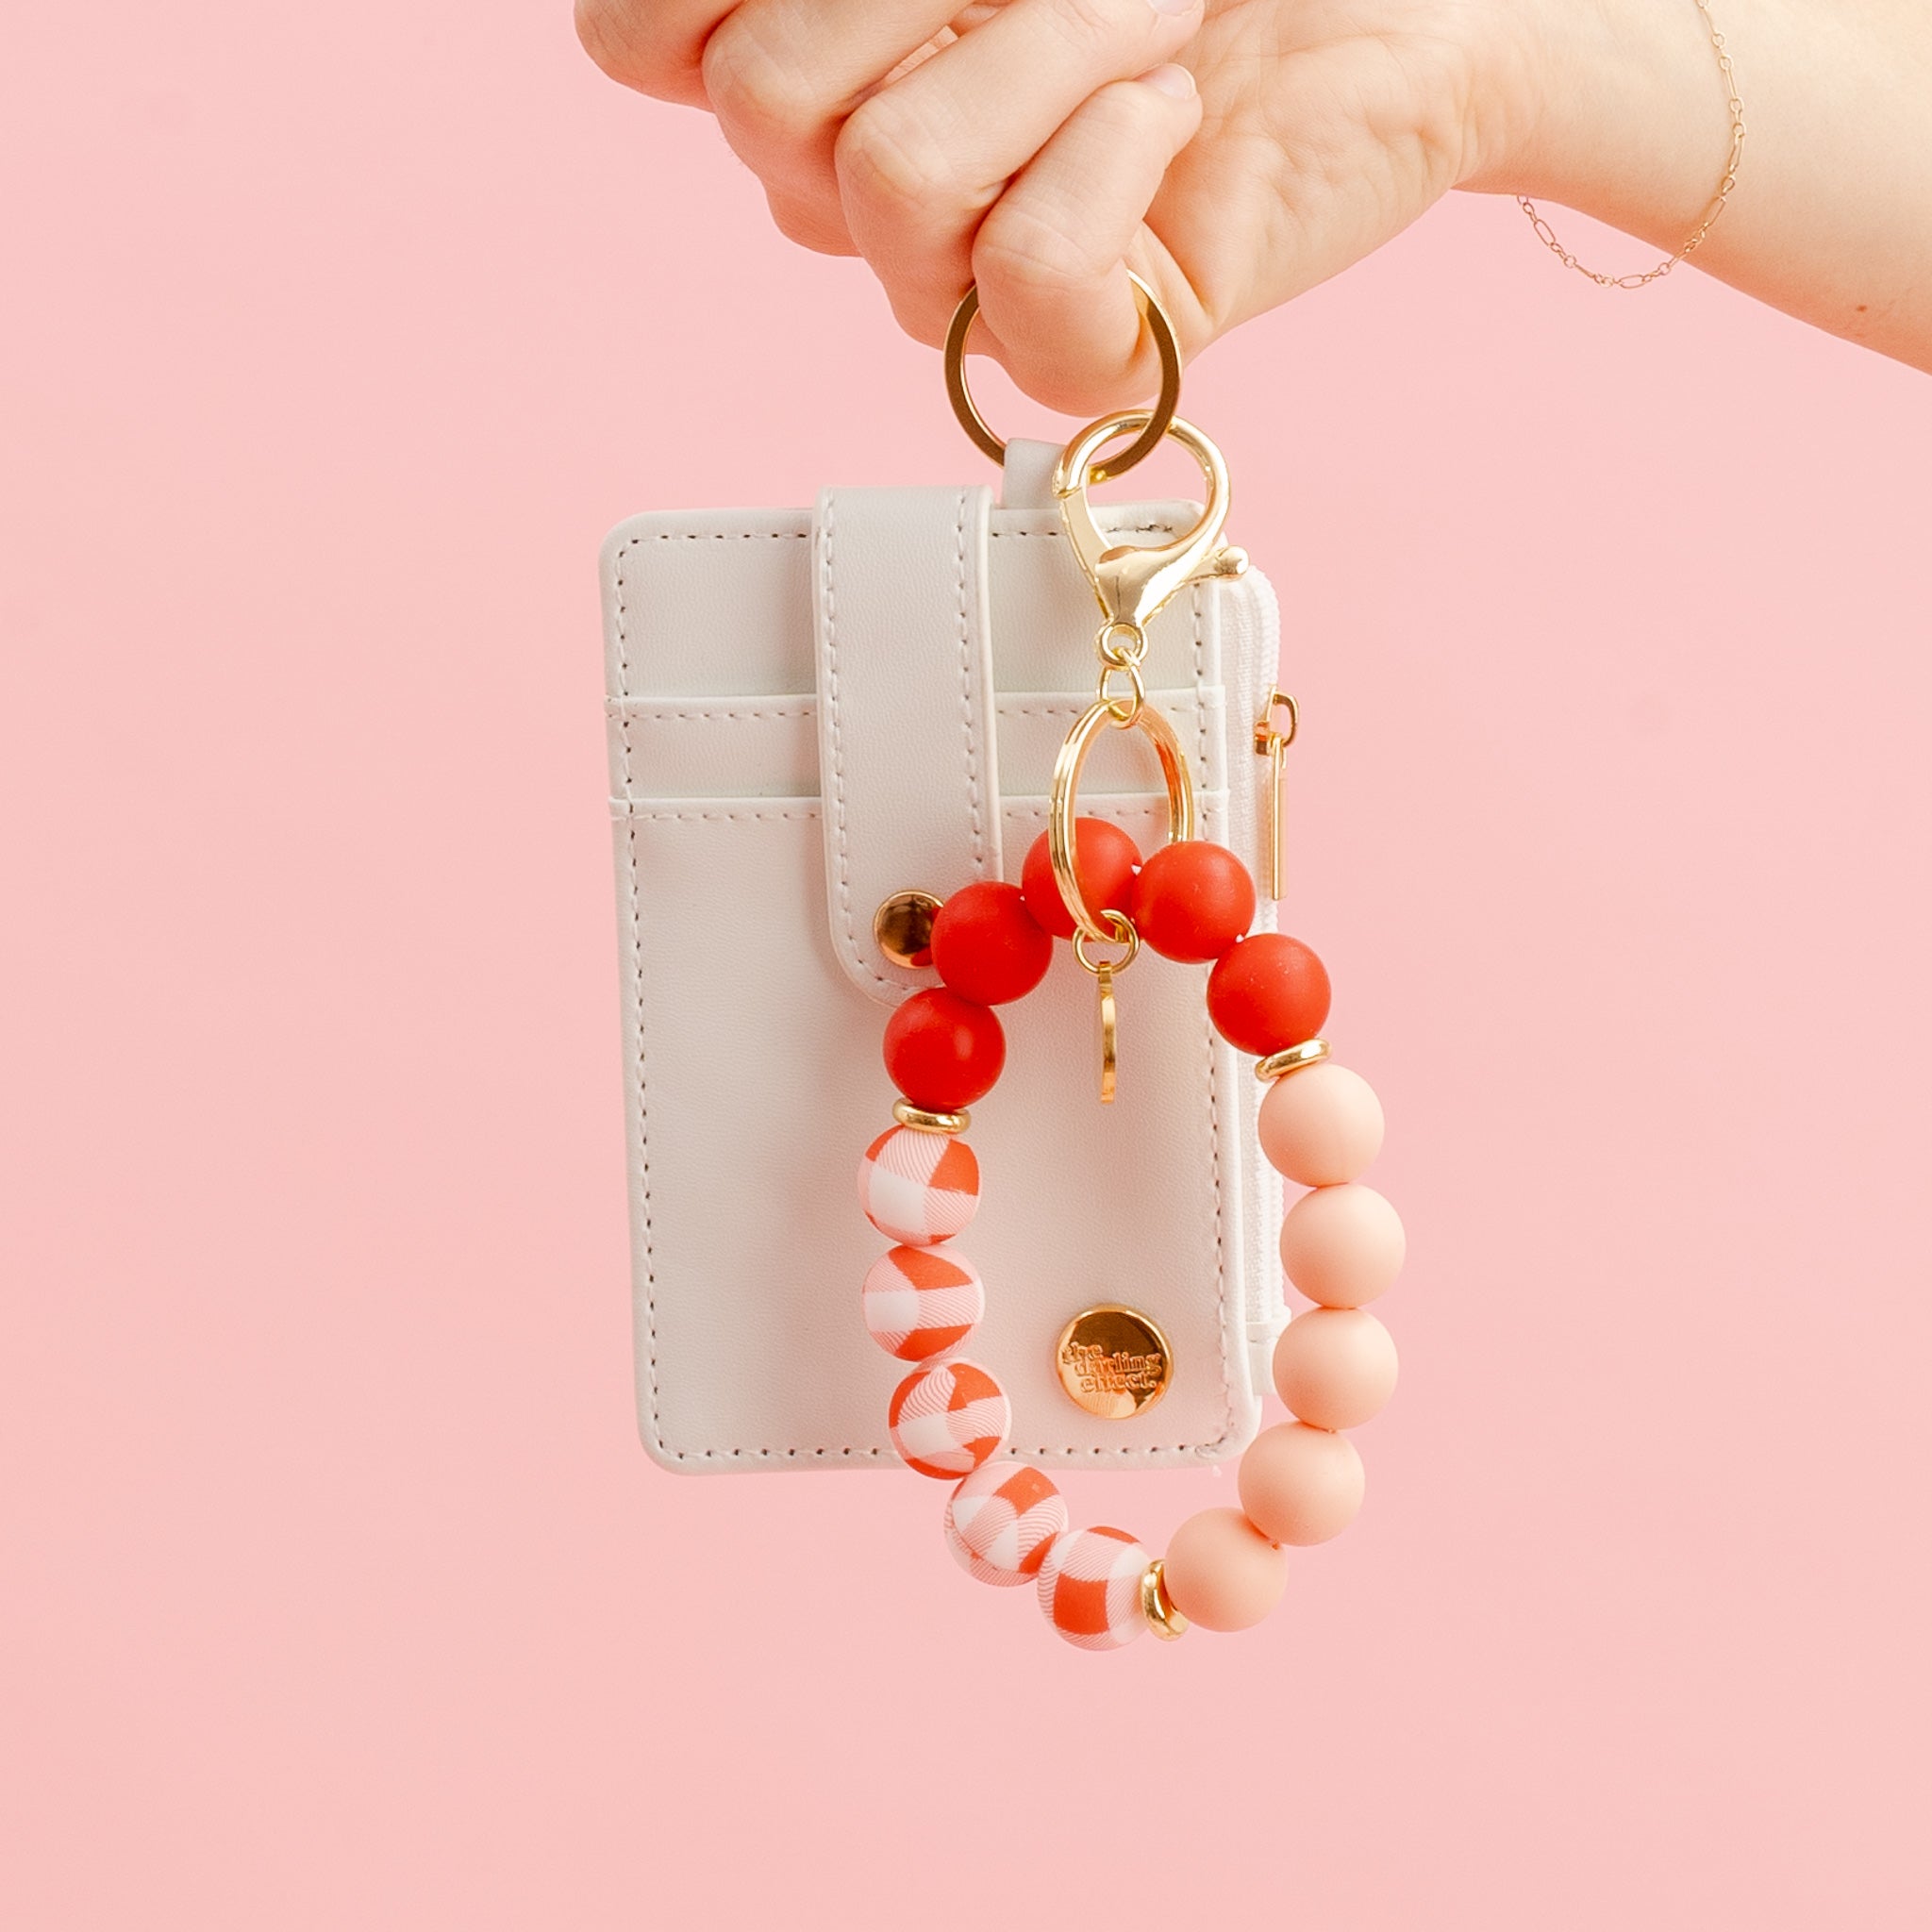 Occasions Hands-Free Keychain Wristlet